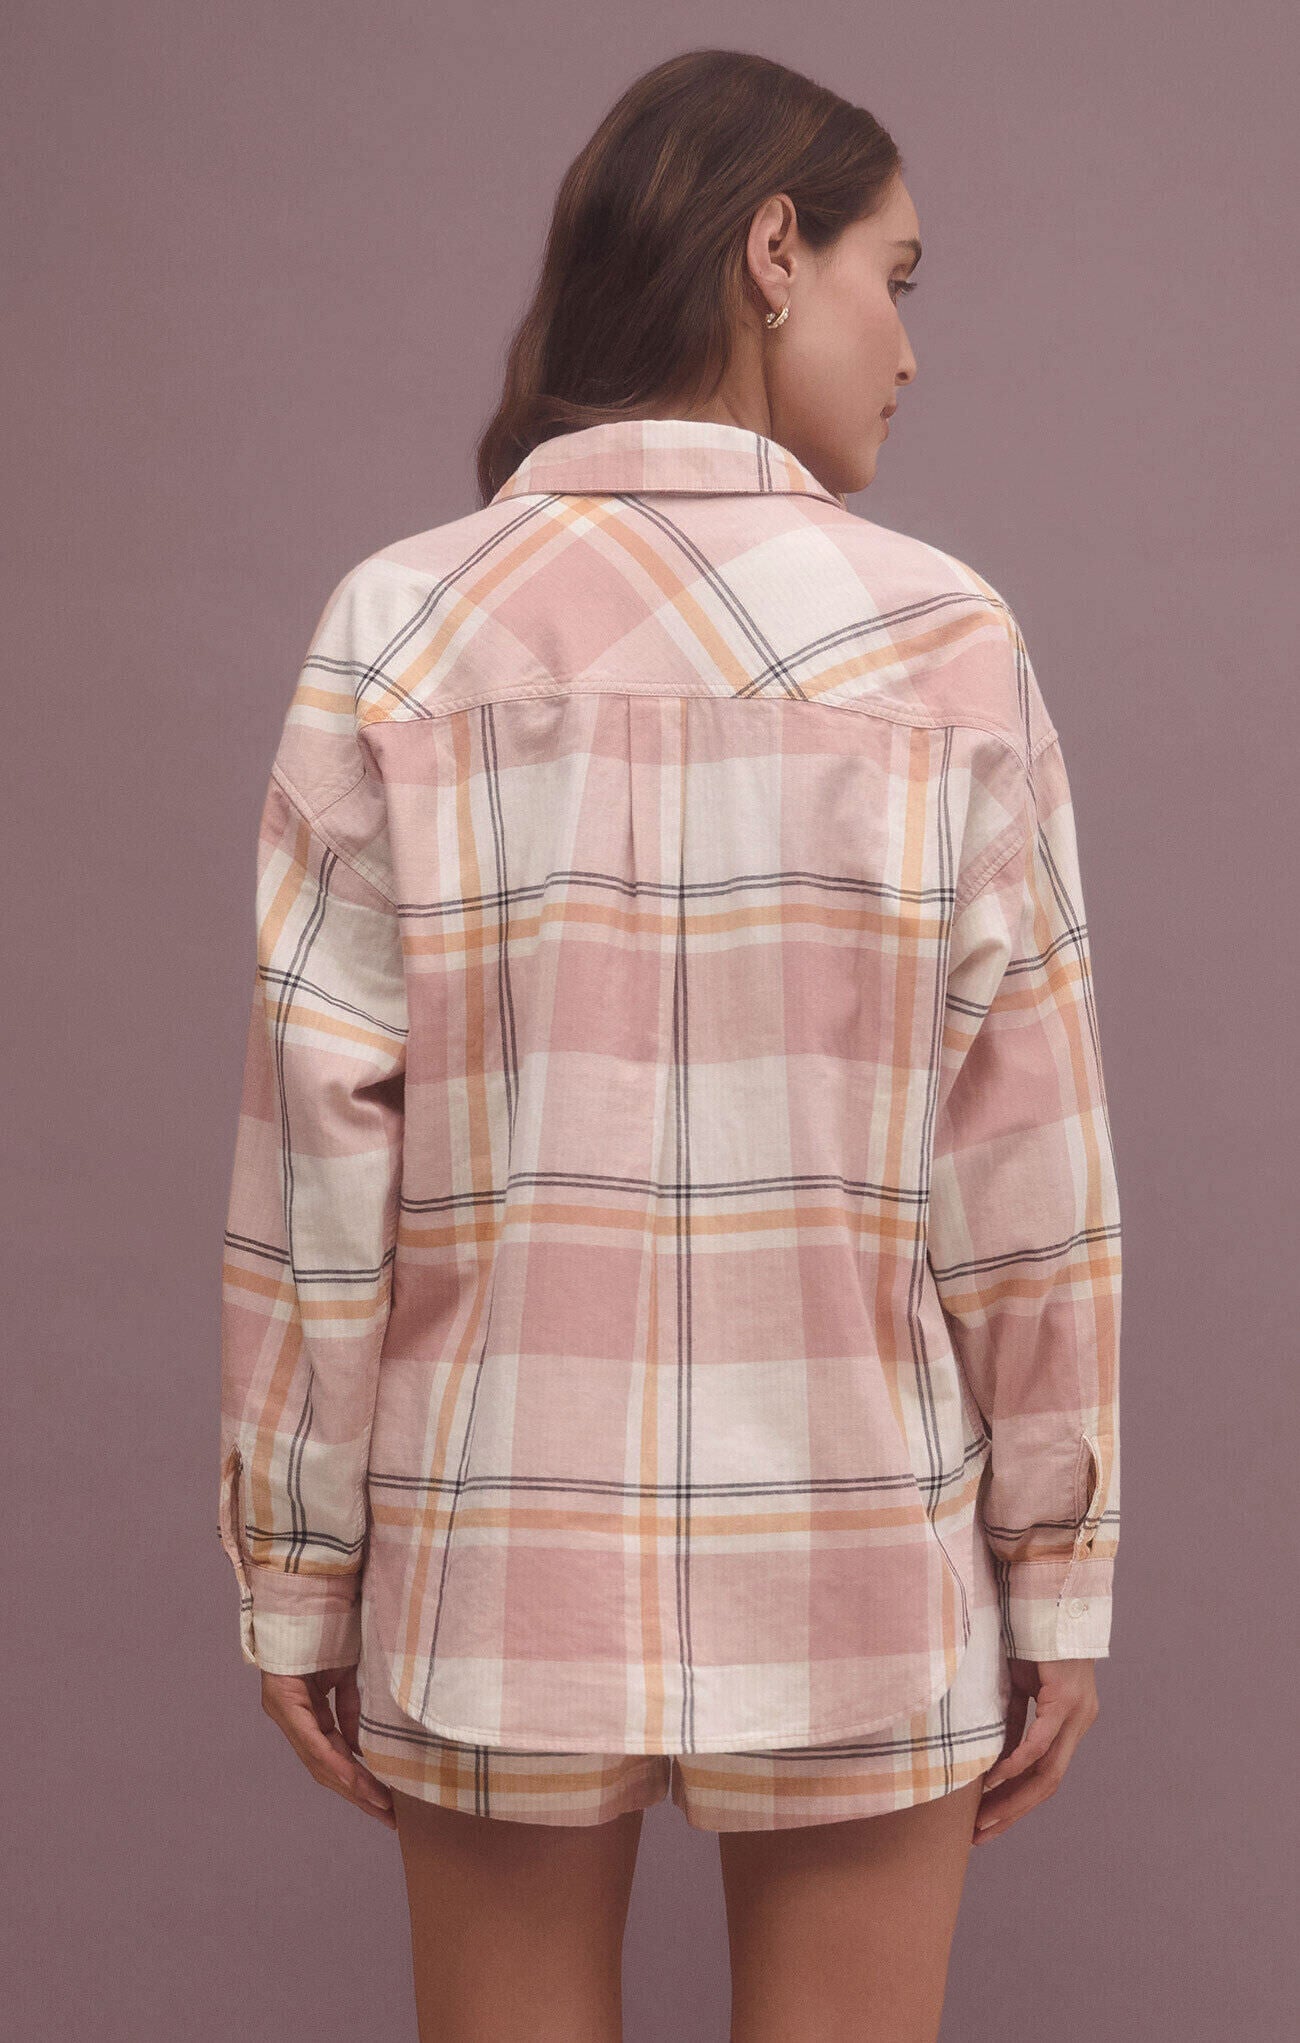 Z SUPPLY OUT WEST PLAID SHIRT IN NATURAL